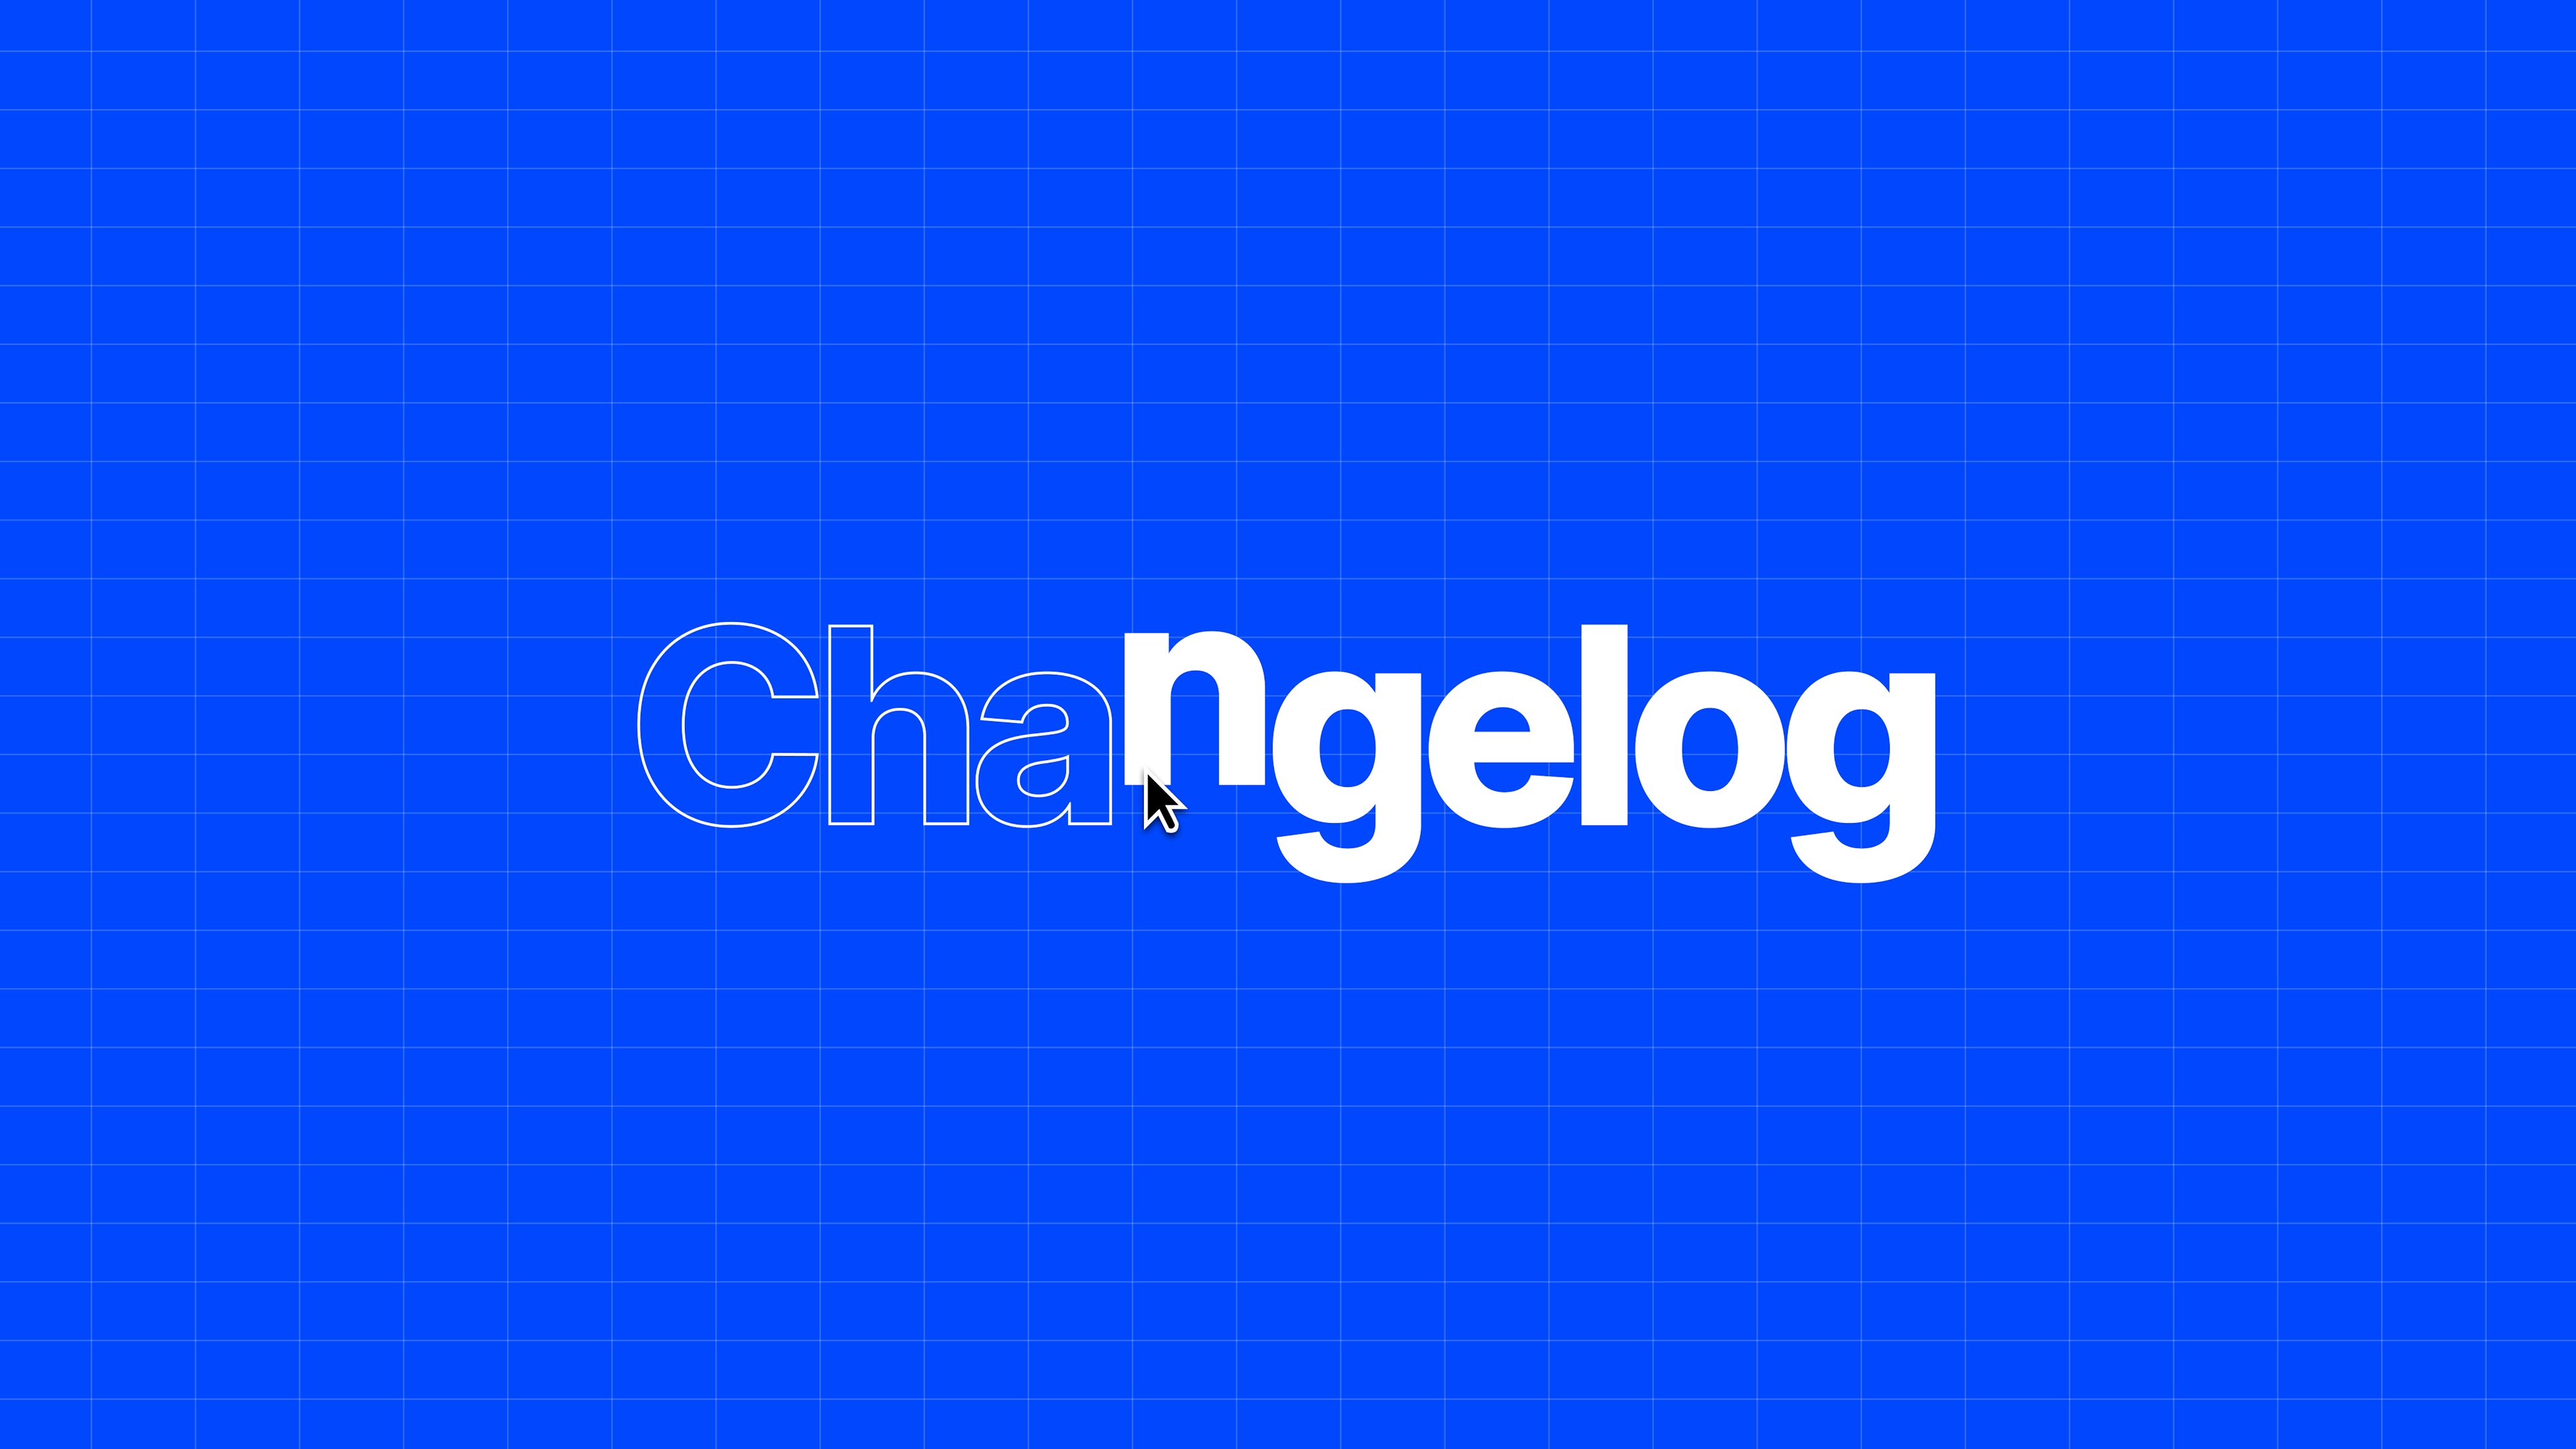 Introducing our brand new changelog